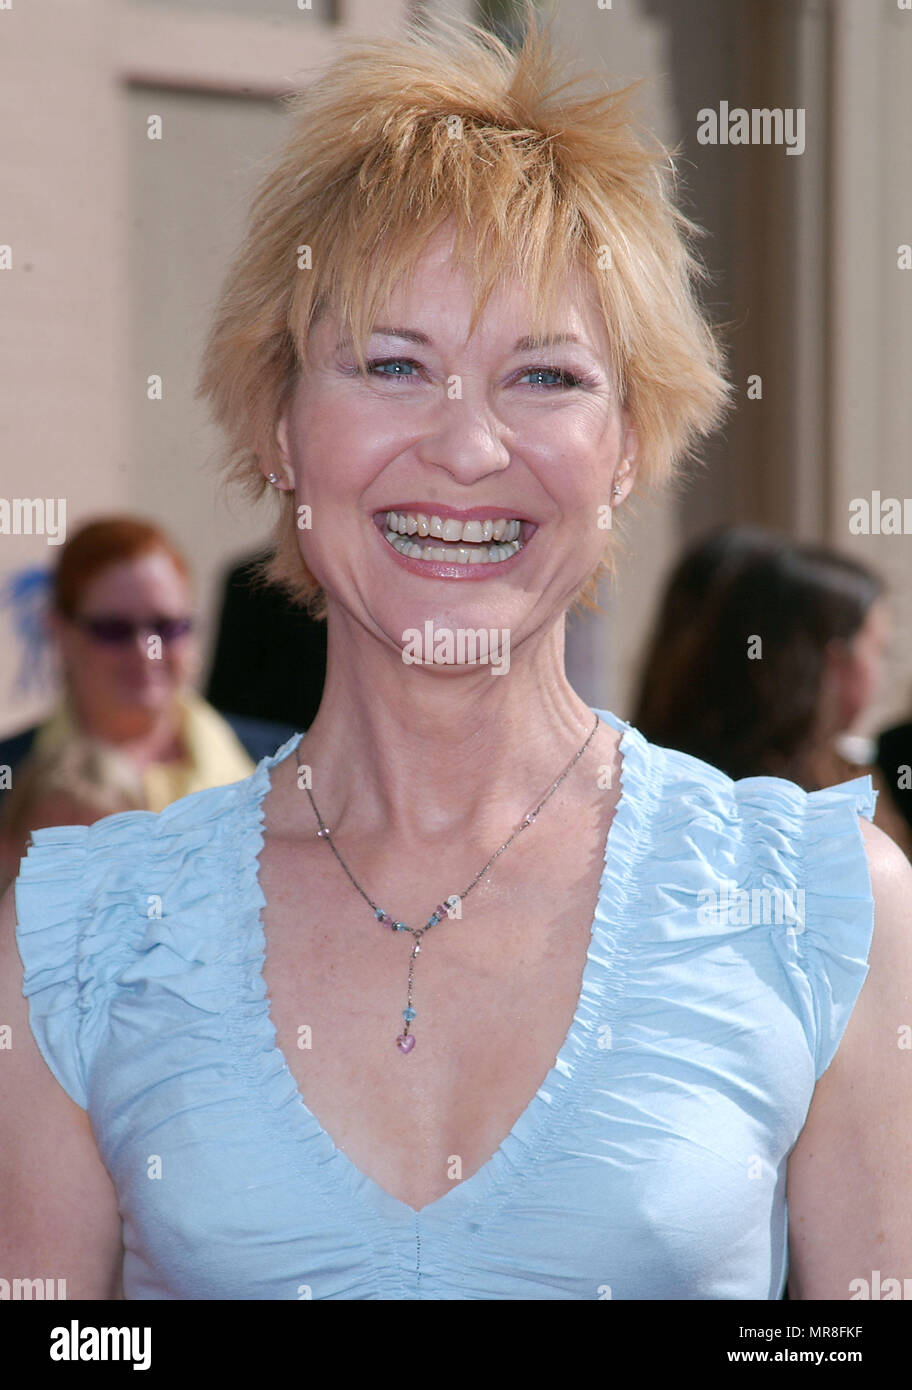 Dee Wallace Stone arriving at the 20th anniversary of the premiere of E.T. The Extra Terrestrial at the Shrine Auditorium in Los Angeles. March 16, 2002. WallaceStone Dee10 Red Carpet Event, Vertical, USA, Film Industry, Celebrities,  Photography, Bestof, Arts Culture and Entertainment, Topix Celebrities fashion /  Vertical, Best of, Event in Hollywood Life - California,  Red Carpet and backstage, USA, Film Industry, Celebrities,  movie celebrities, TV celebrities, Music celebrities, Photography, Bestof, Arts Culture and Entertainment,  Topix, headshot, vertical, one person,, from the year , 2 Stock Photo